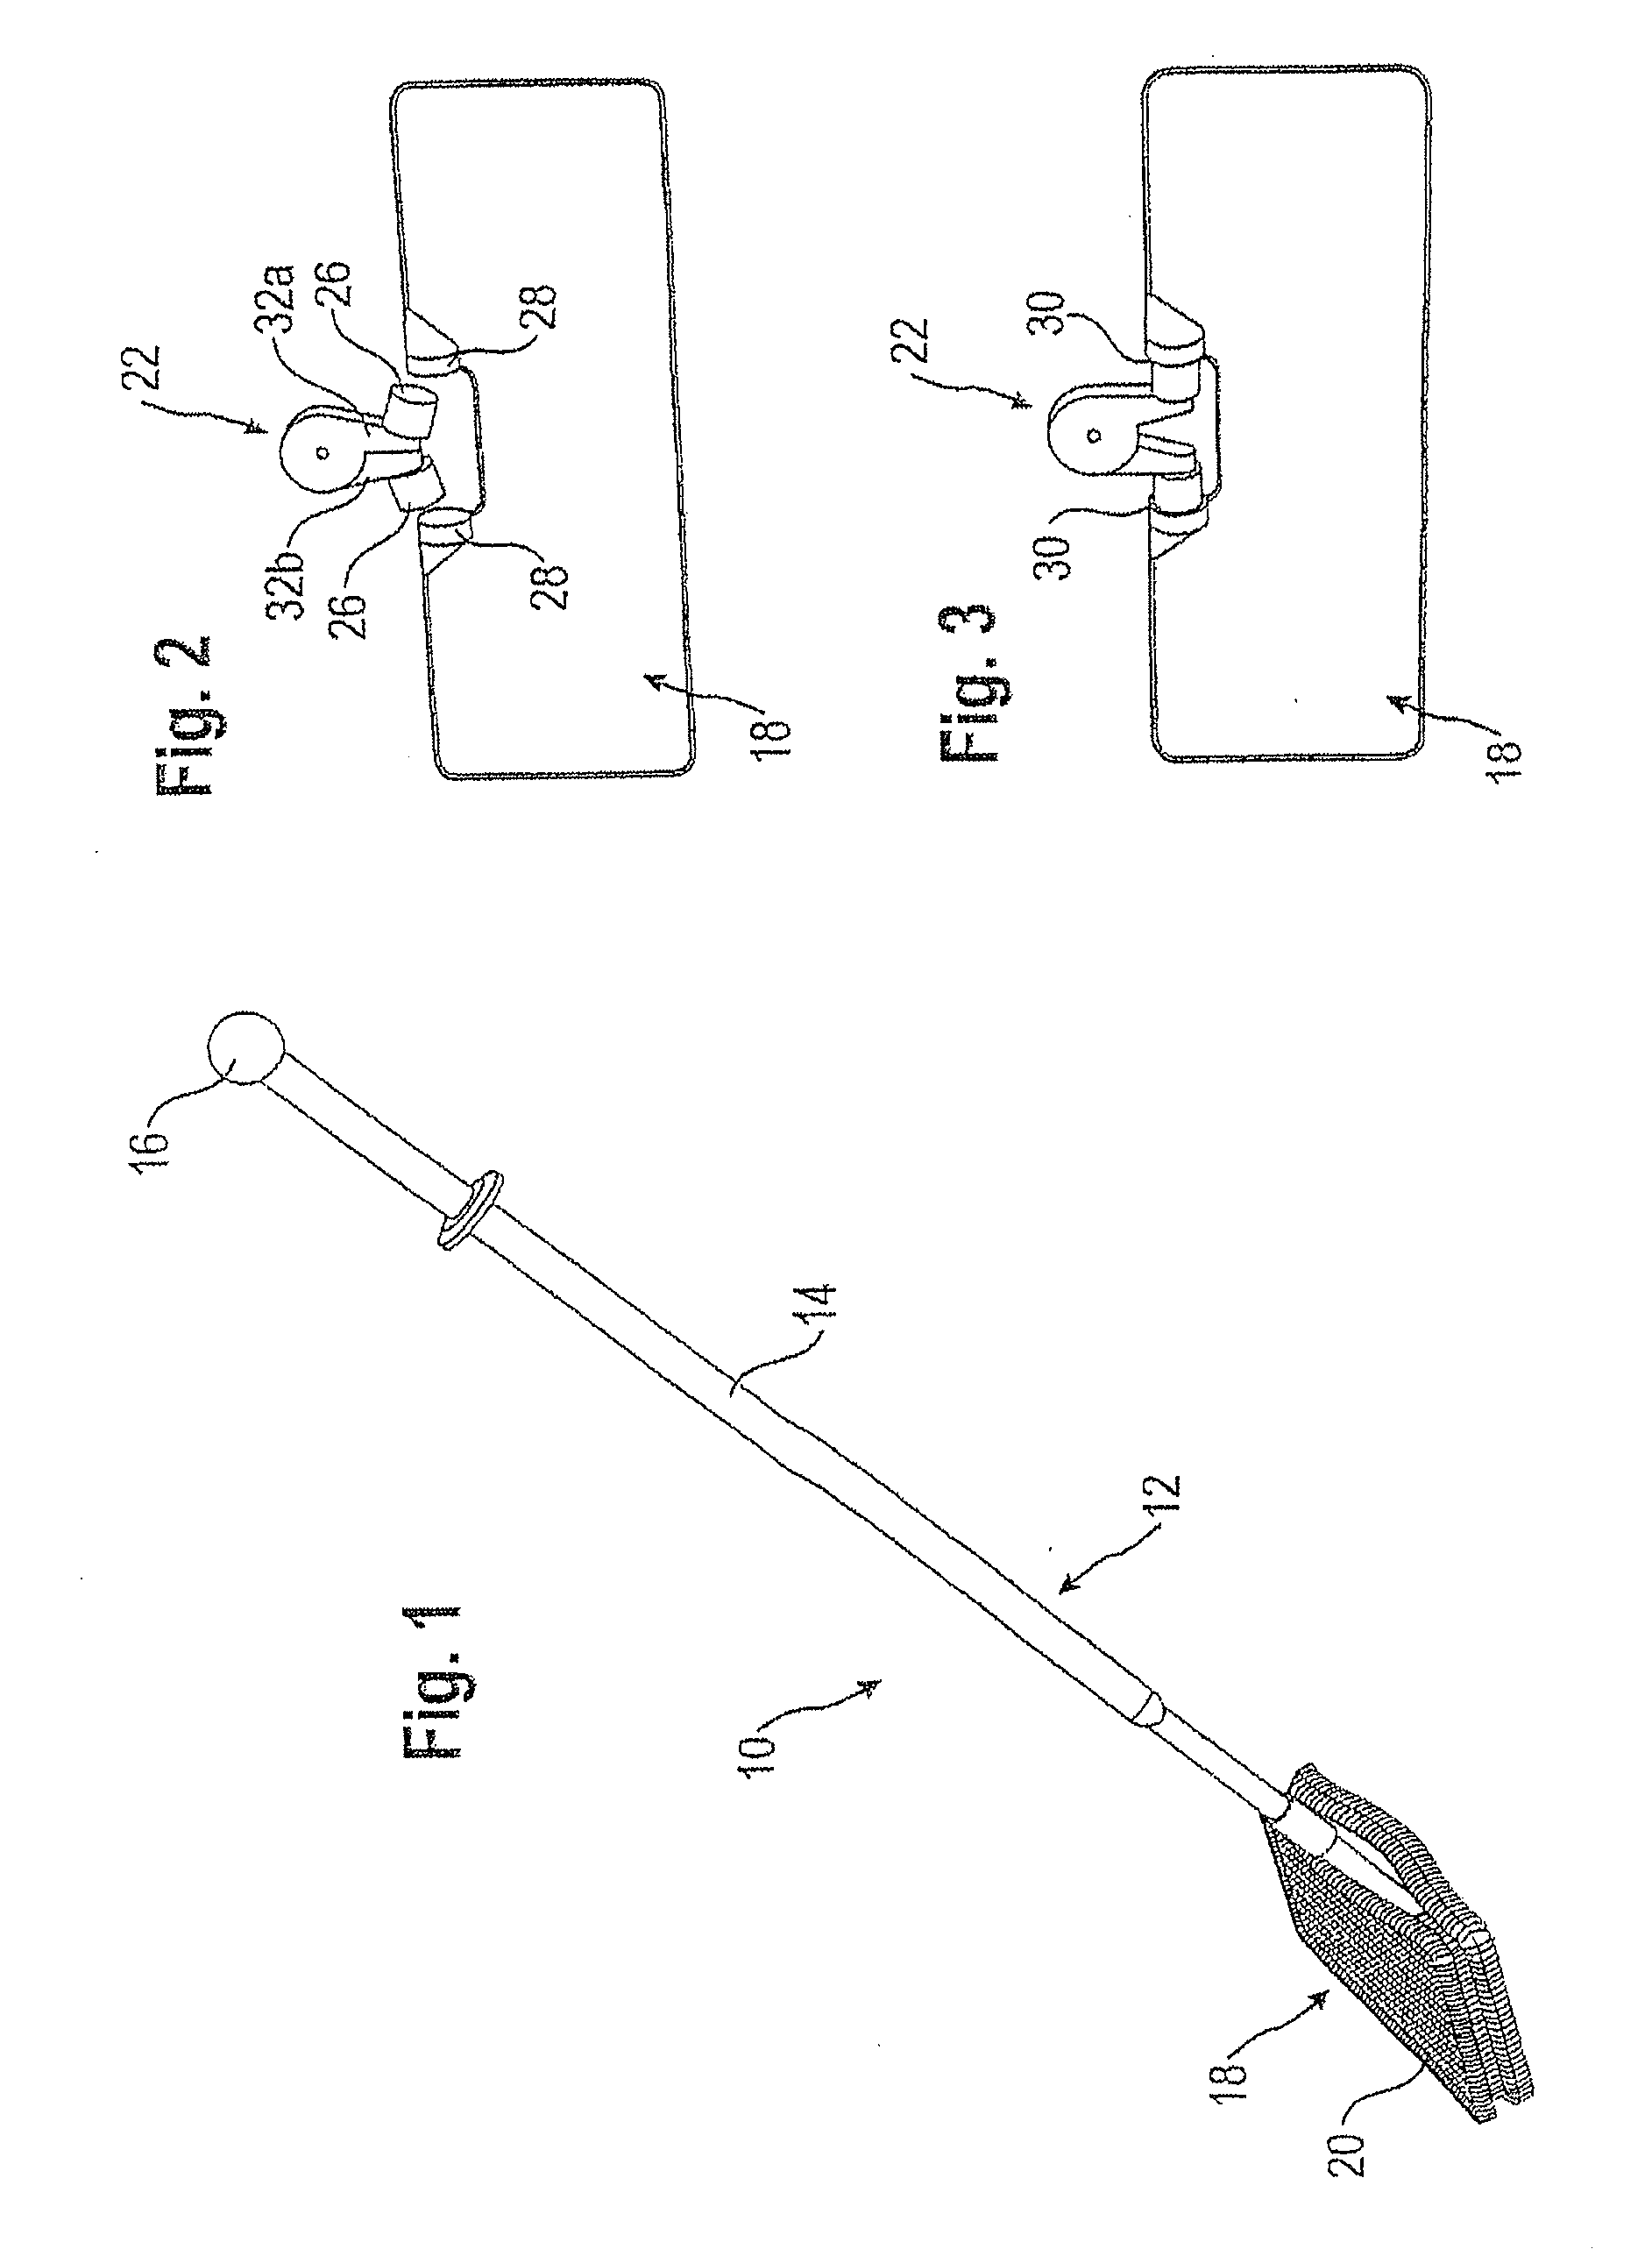 Hand-operated cleaning device and mop cover